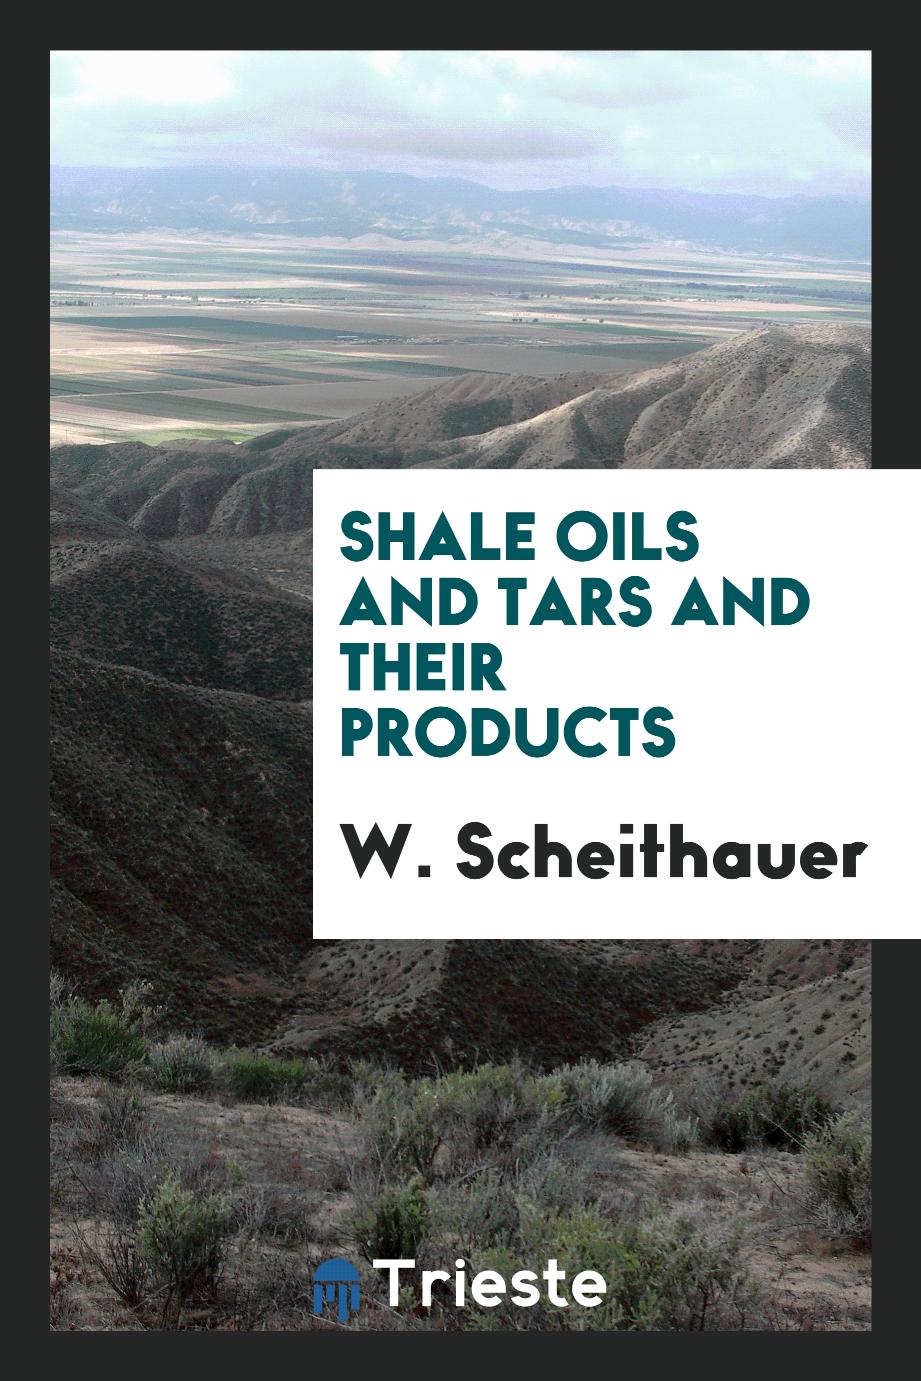 Shale oils and tars and their products